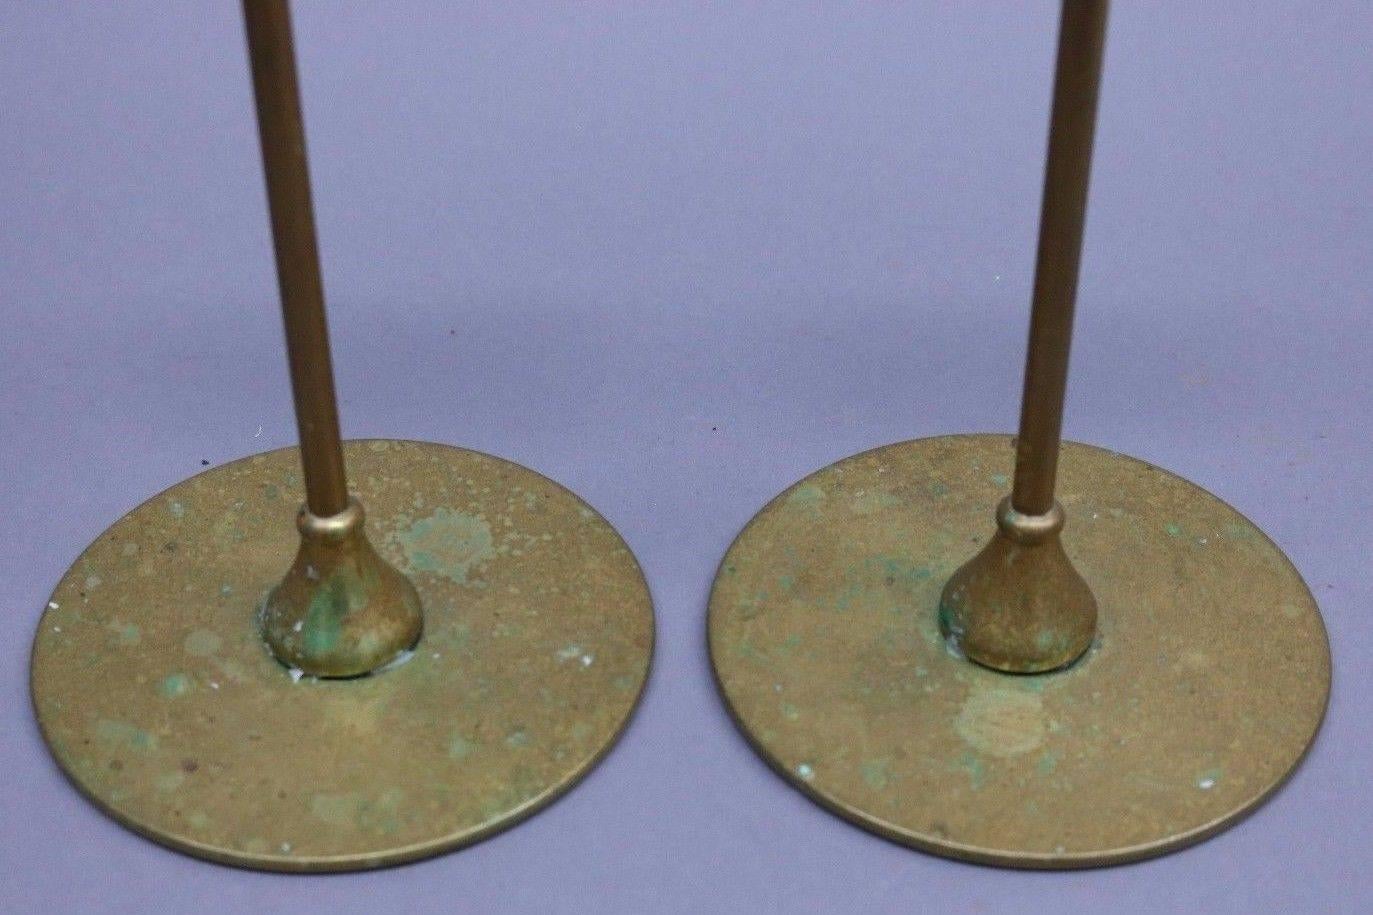 Antique Arts & Crafts Jarvie candlesticks feature the traditional clean, simple lines of the movement, circa 1910. Robert R. Jarvie "the Candlestick Maker," created some of the most sophisticated metal candlesticks of the Arts &